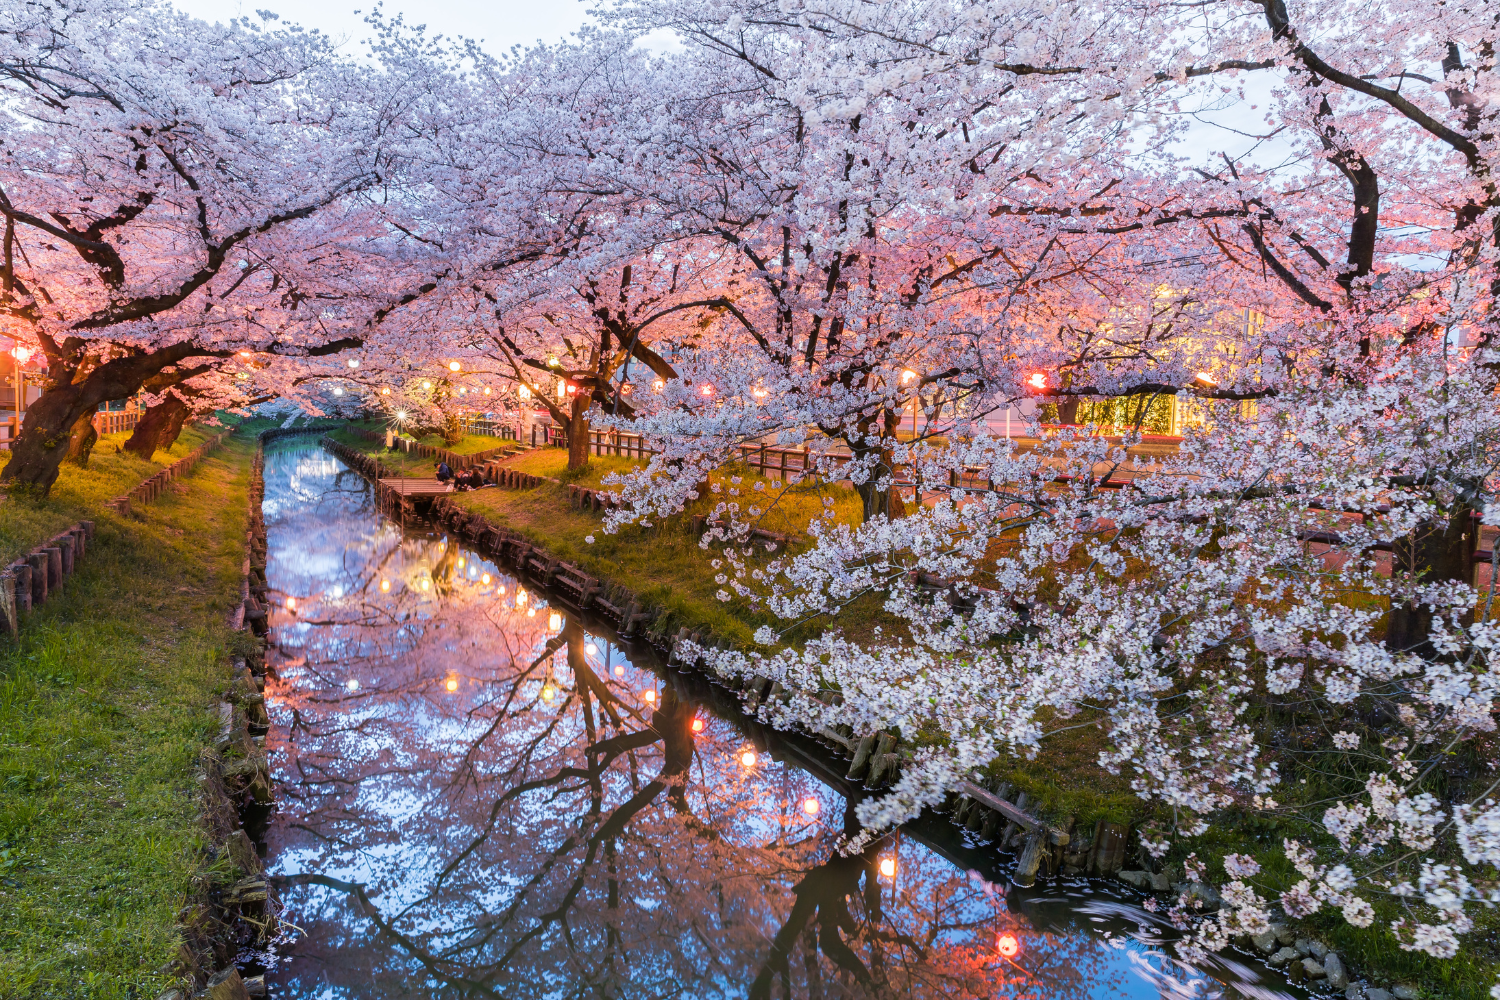 Japanese Cherry blossom trees along the edge of a canal. 